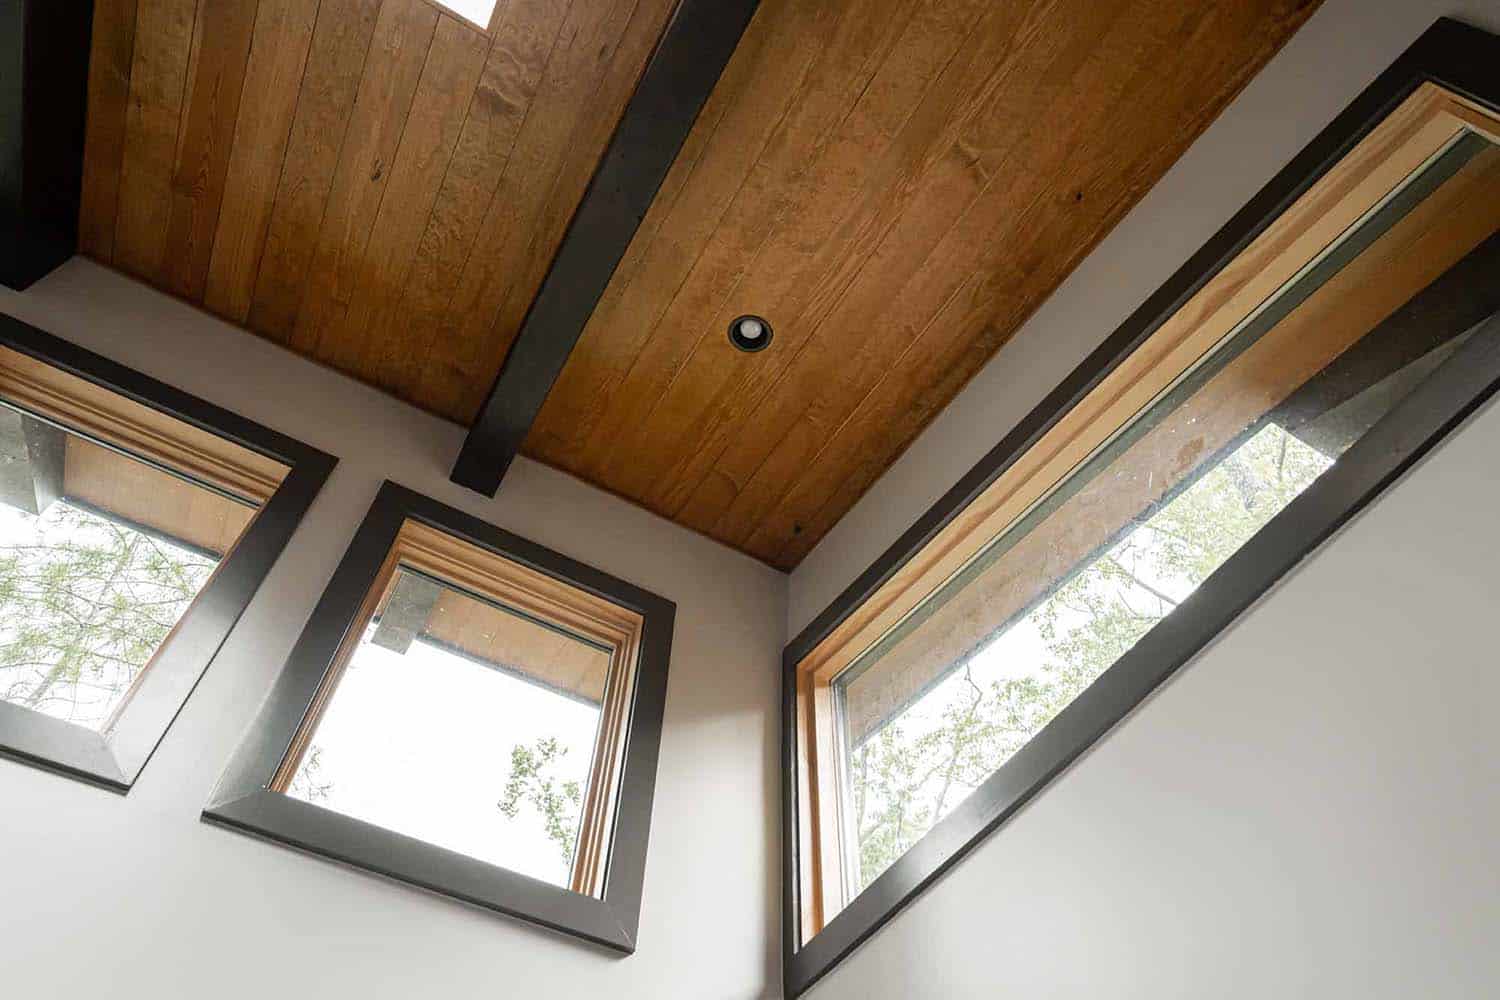 transitional-style-bedroom-ceiling-detail